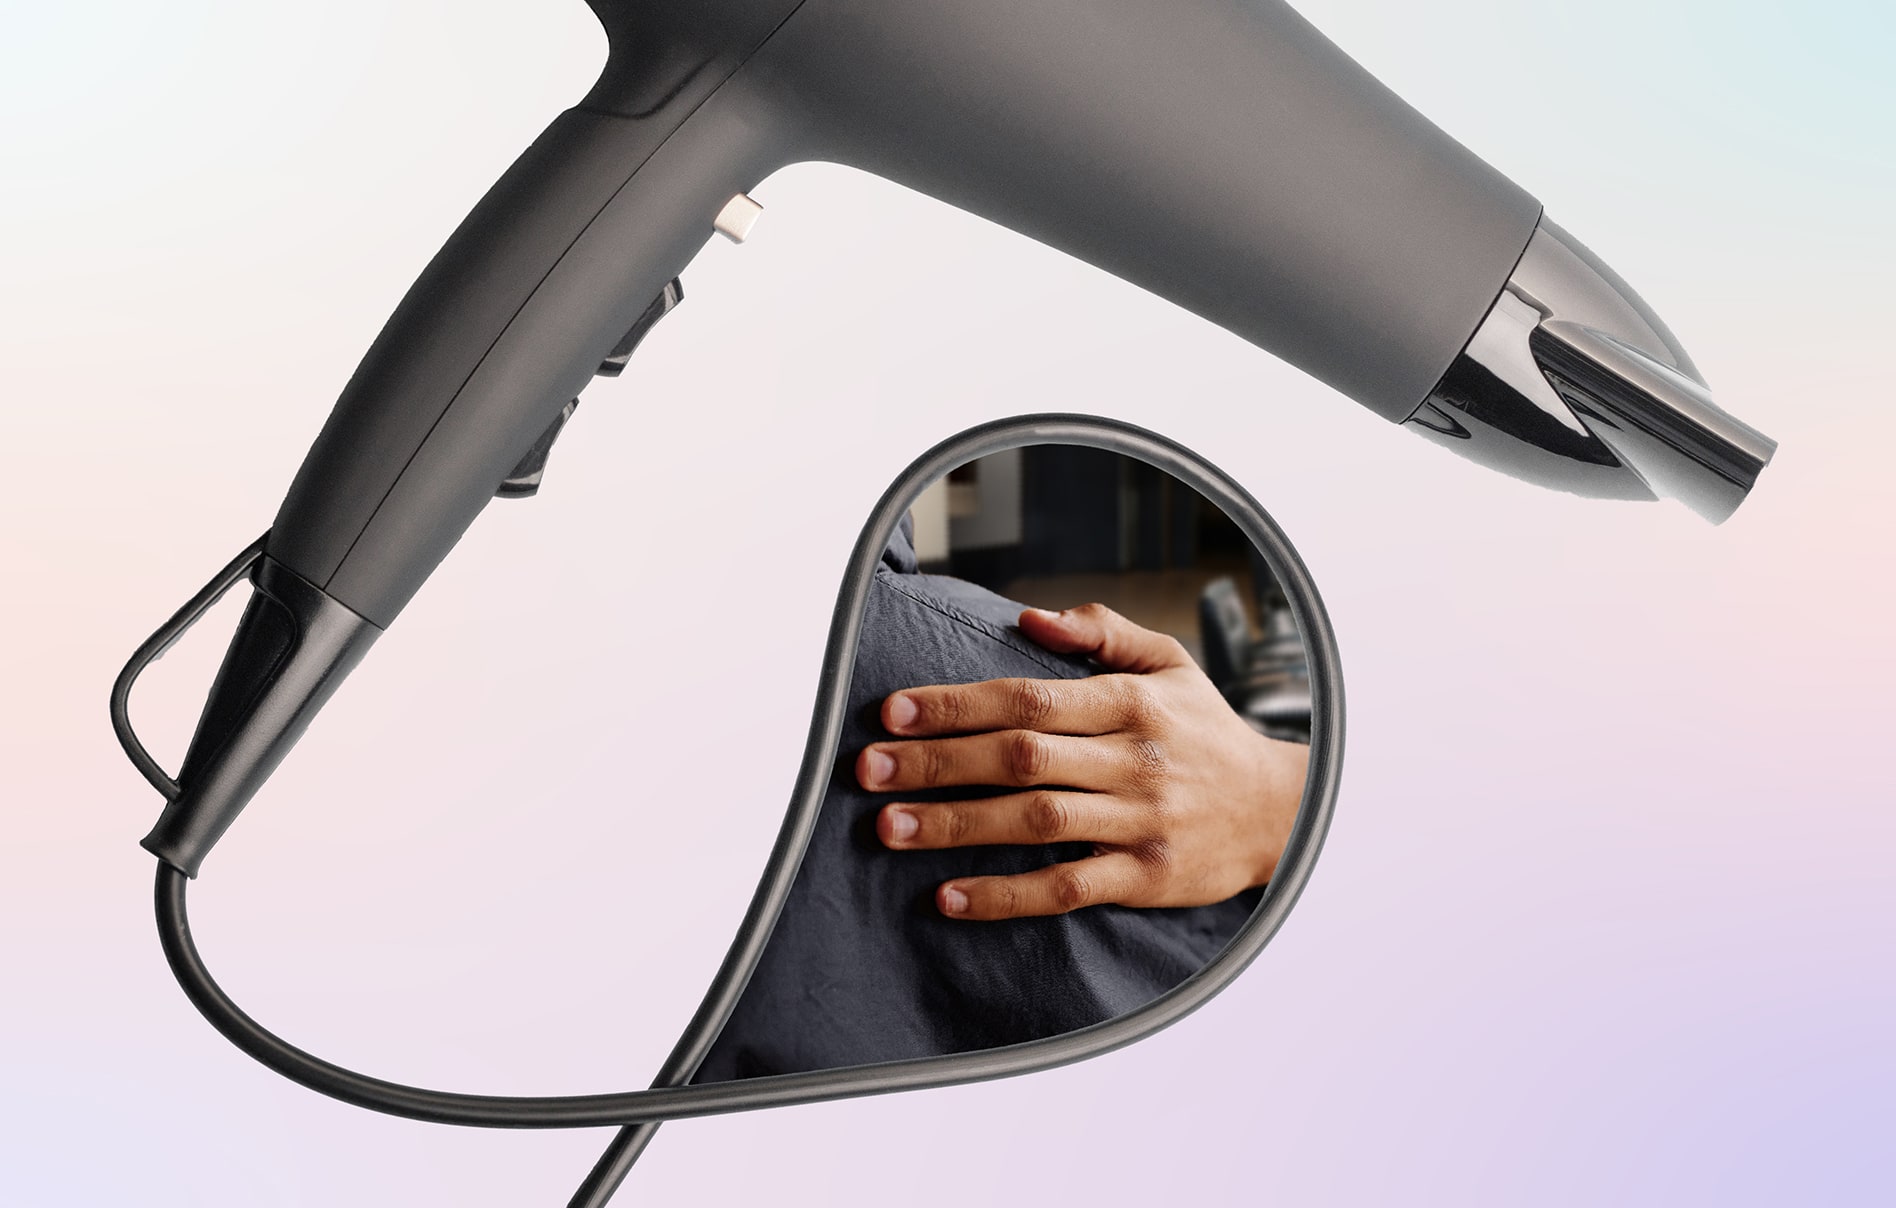 A person putting their hand on the shoulder of another person framed in the loop of a hair dryer's cord